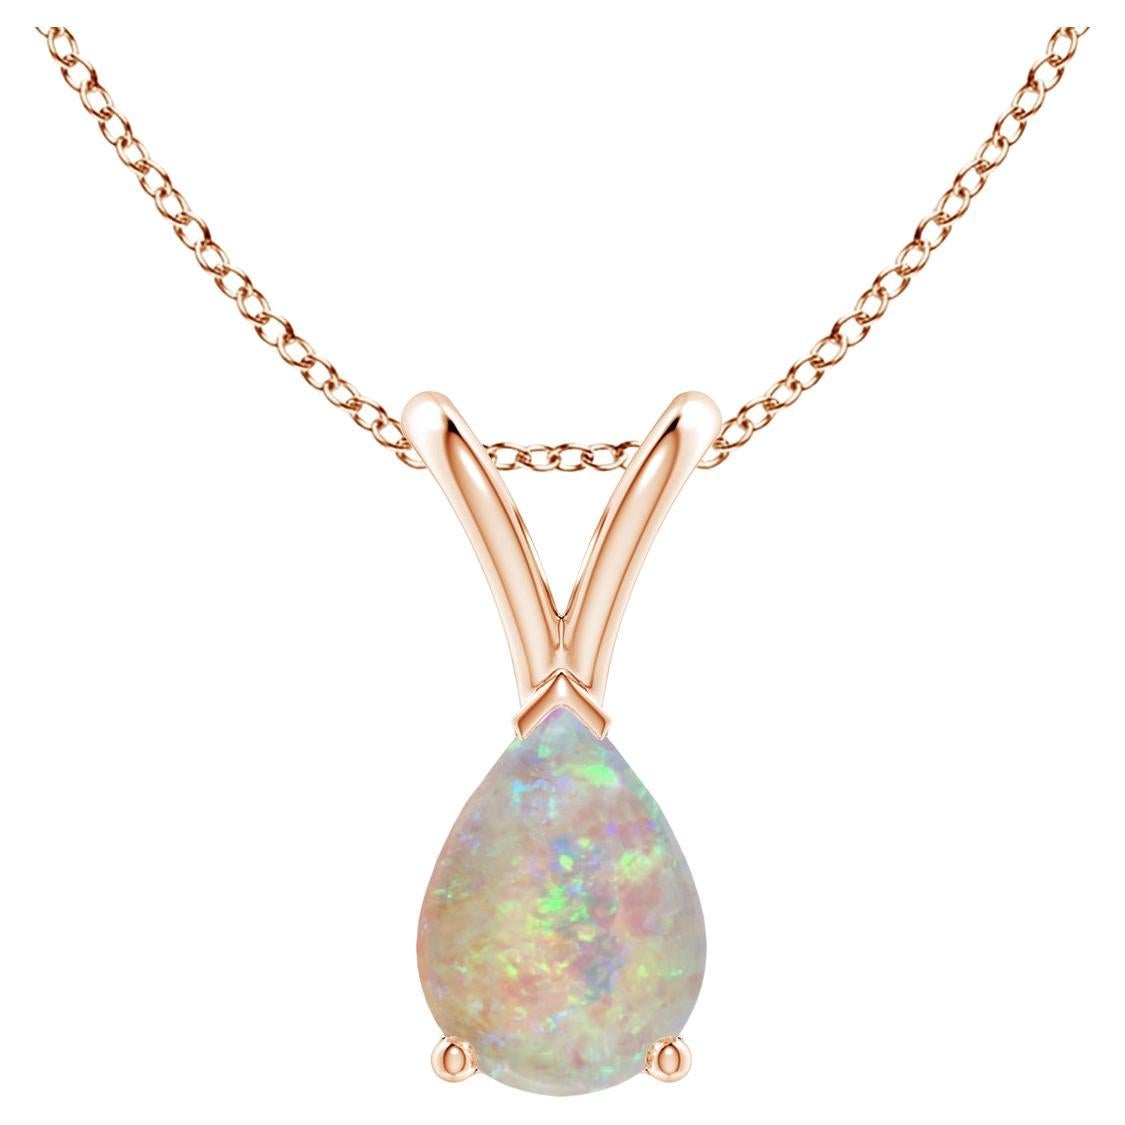 ANGARA Natural V-Bale Pear-Shaped 0.42ct Opal Solitaire Pendant in 14K Rose Gold